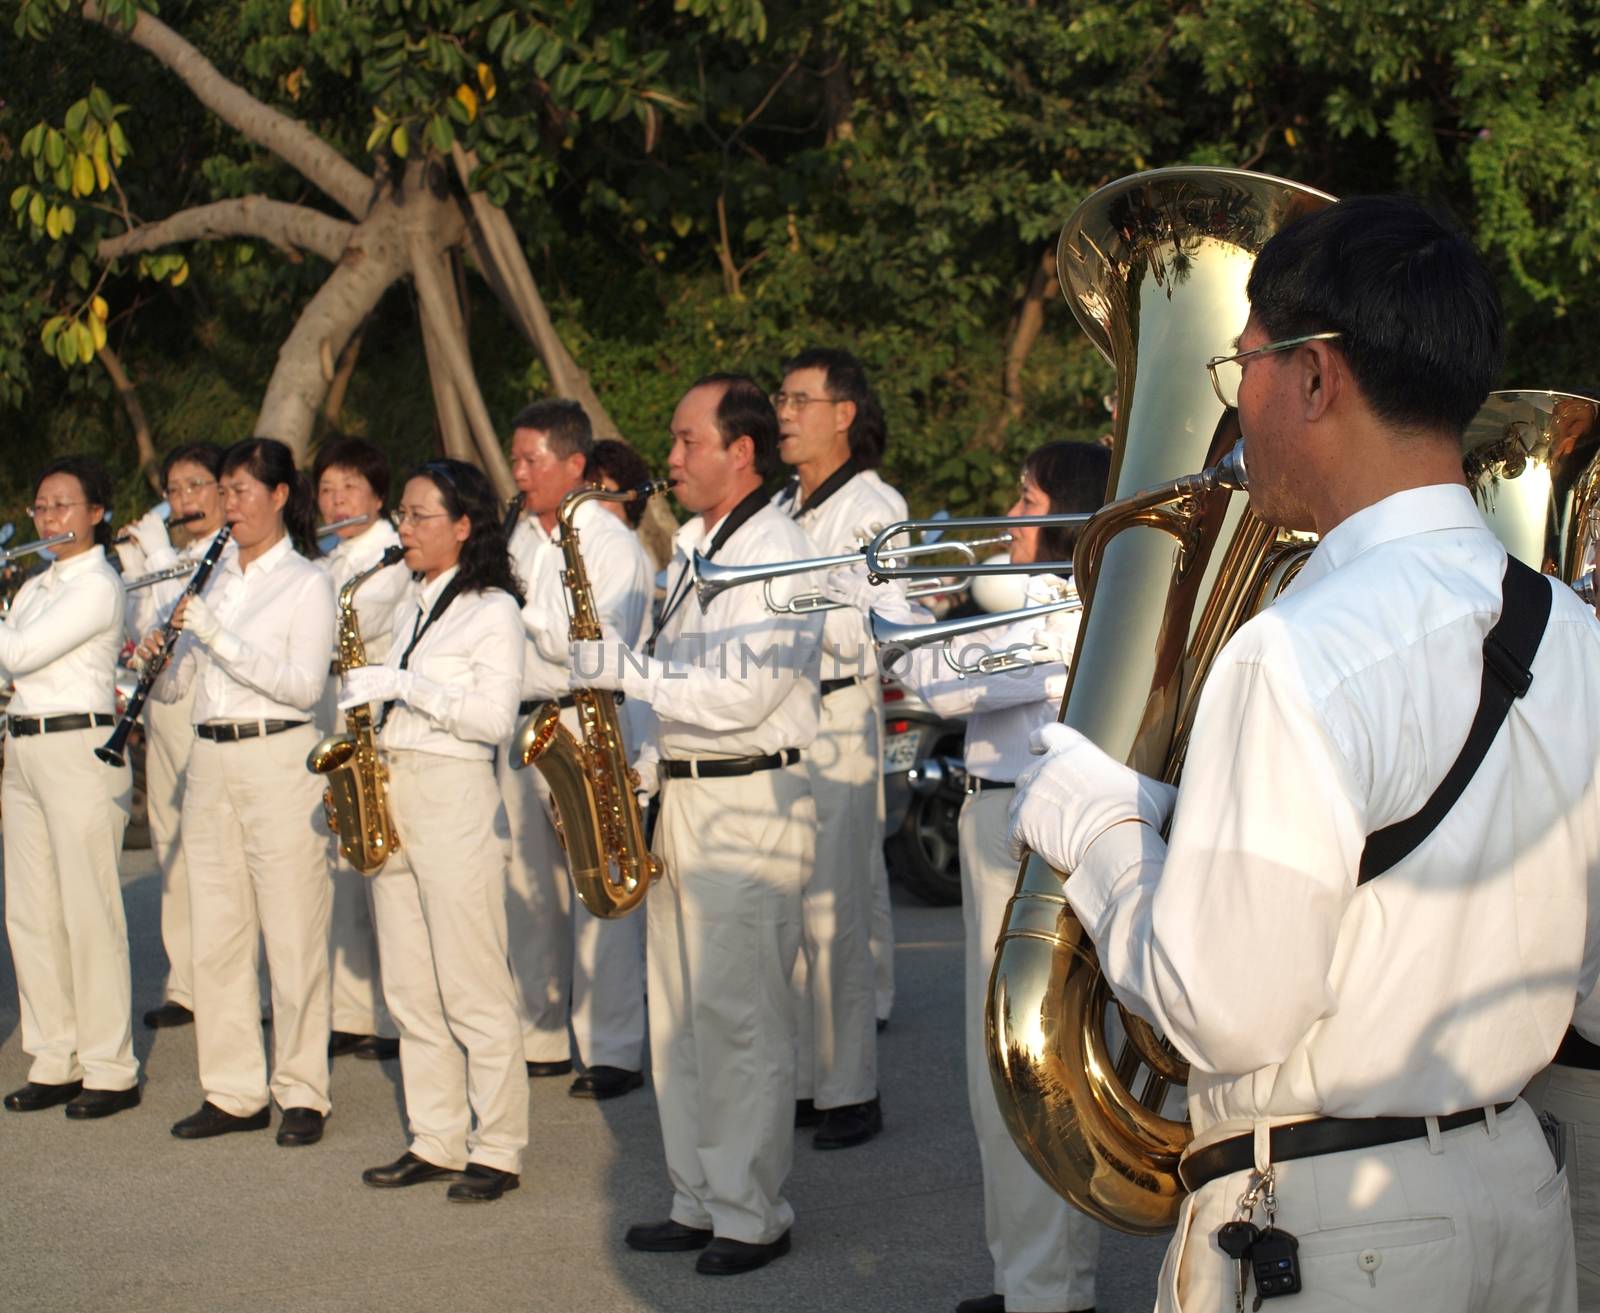 KAOHSIUNG, TAIWAN, JANUARY 26: An unidentified marching band plays for onlookers as part of the activities of the Kaohsiung 2012 Spring Art Festival on January 26, 2012 in Kaohsiung.